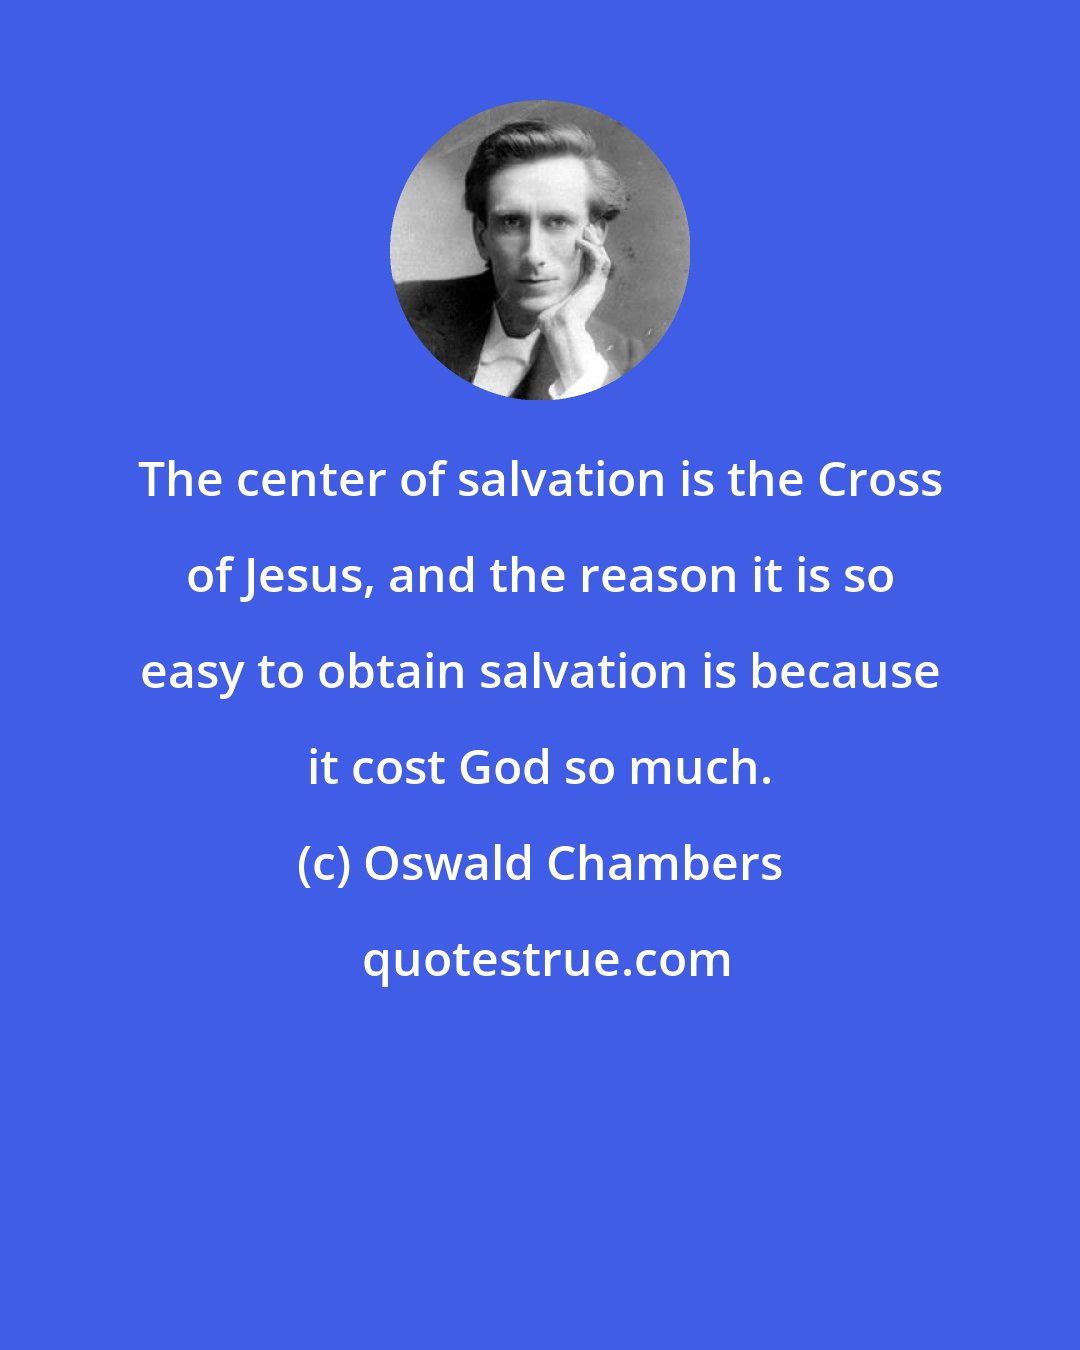 Oswald Chambers: The center of salvation is the Cross of Jesus, and the reason it is so easy to obtain salvation is because it cost God so much.